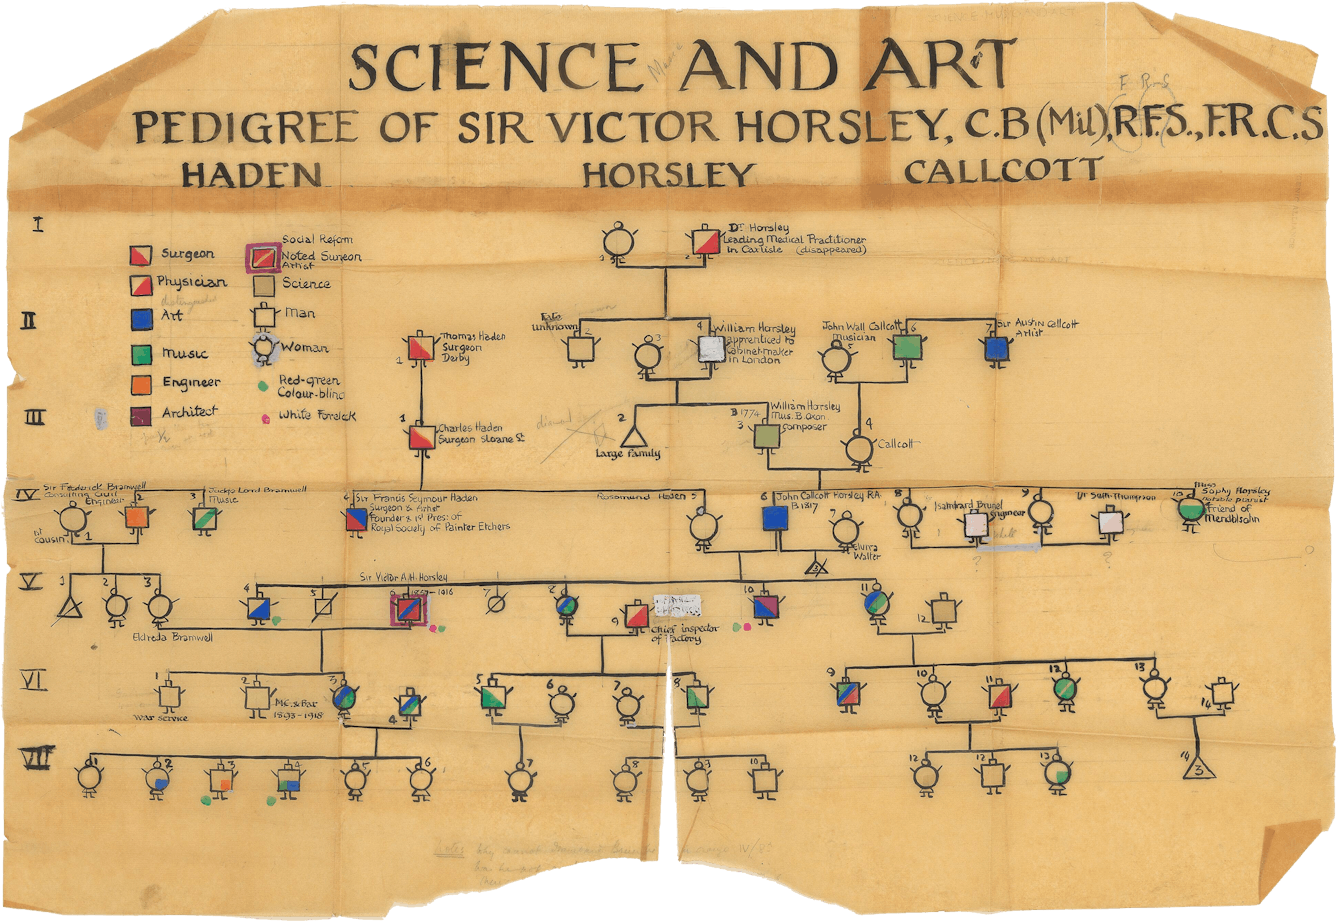 Family tree of Sir Victor Horsley with males represented as squares and females as circles. A colour-coded key indicates whether someone was: a surgeon, a physician, artist, musician, engineer, artist, architect, social reformer noted surgeon artist (all one entry - Horsley's), scientist, red-green colourblind, or had a white forelock. 